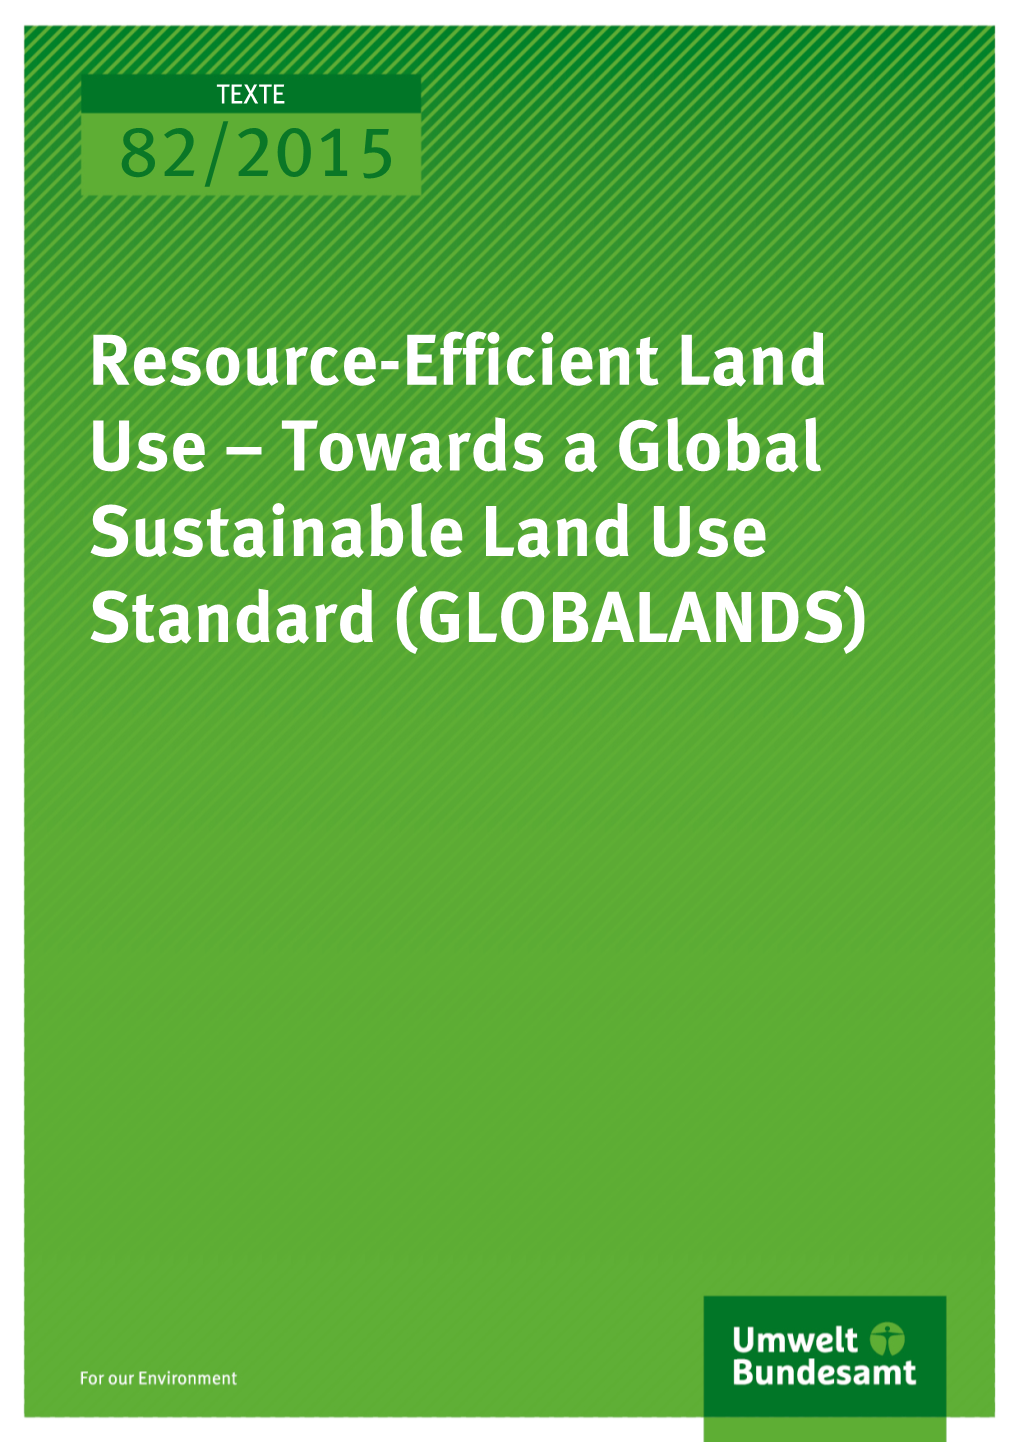 Towards a Global Sustainable Land Use Standard (GLOBALANDS)